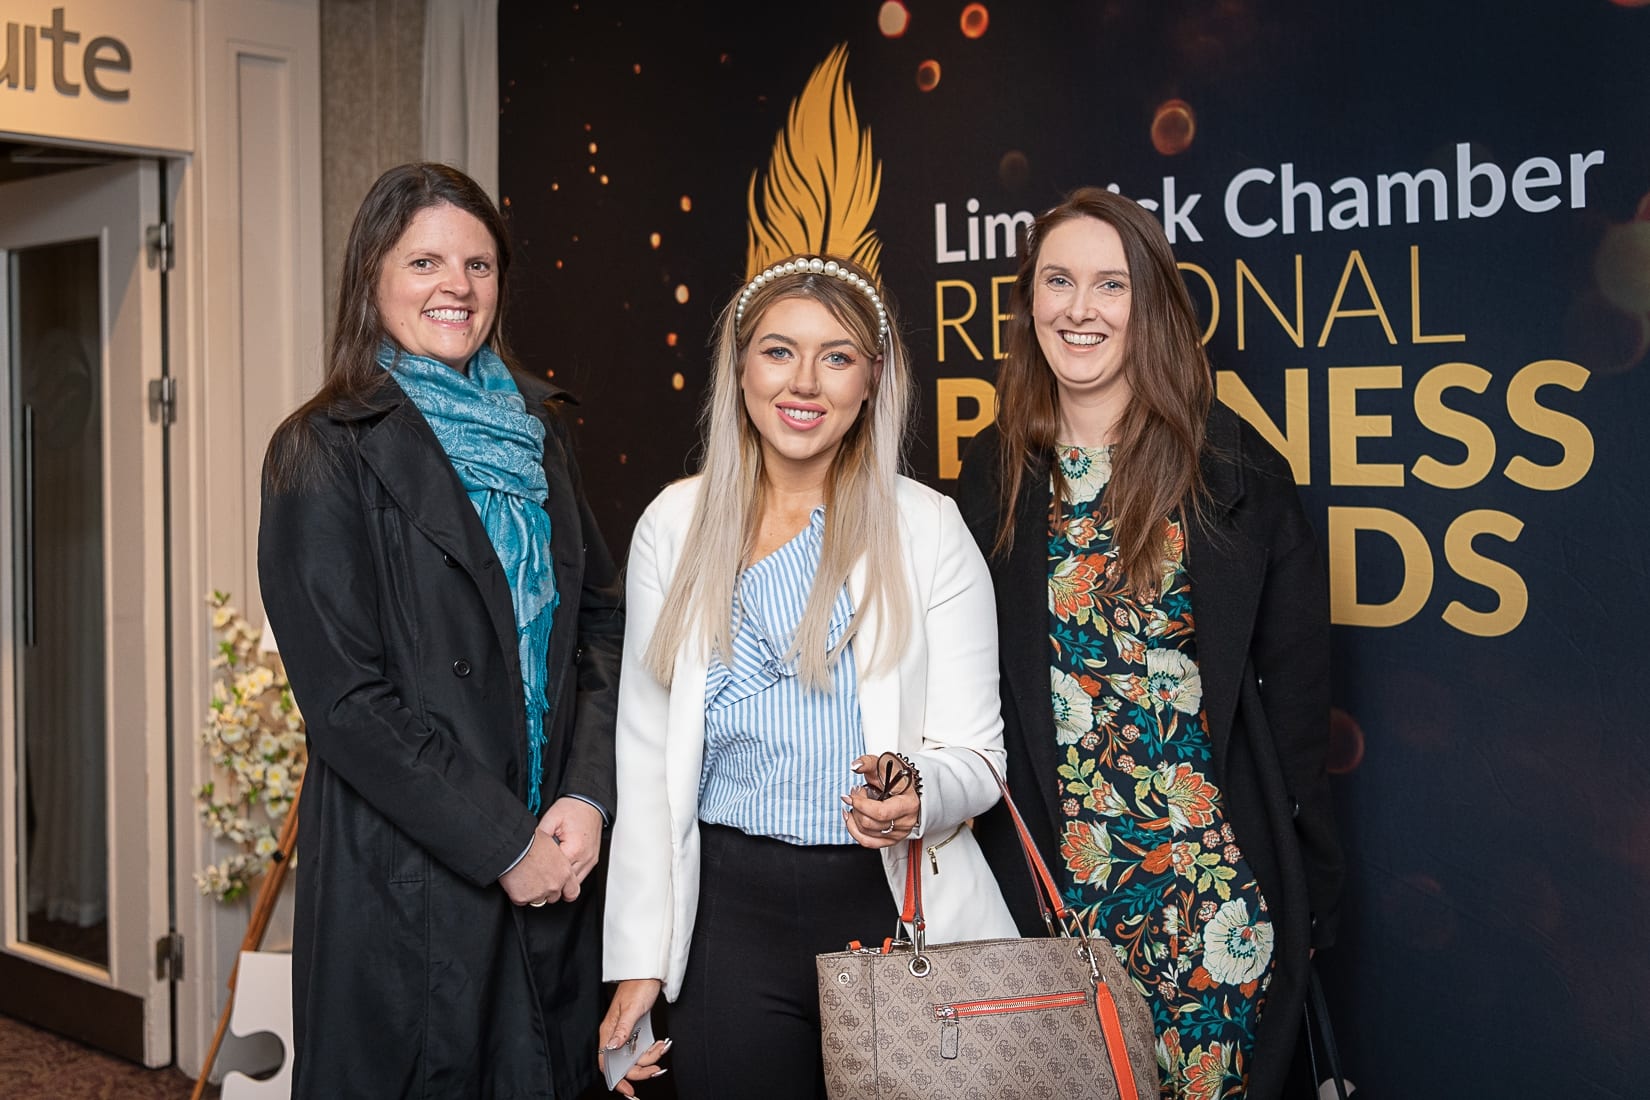 No repro fee-Limerick Chamber President Dinner Shortlist announcement which was held in The Limerick Strand Hotel on Wednesday 16th October  - From Left to Right: Aine McInerney - BDO, Roisin Curran - Northern Trust, Angela Kinnane - BDO
Photo credit Shauna Kennedy